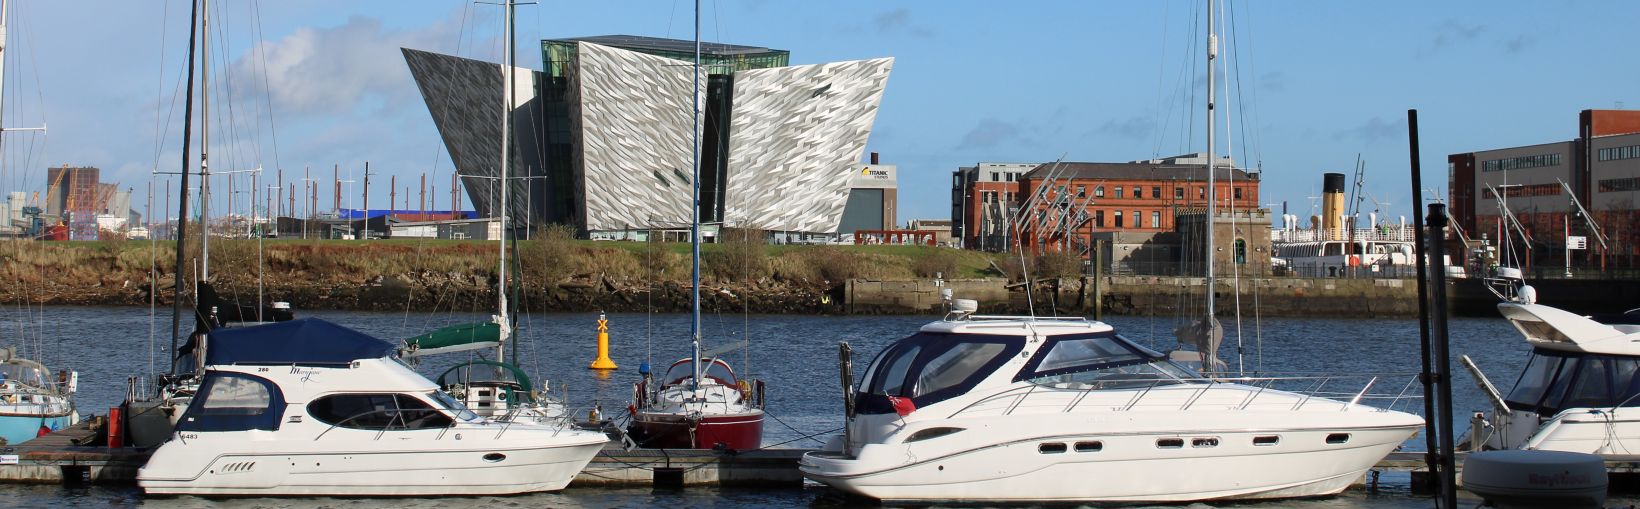 Titanic Belfast Northern Ireland view from dock at SSE arena